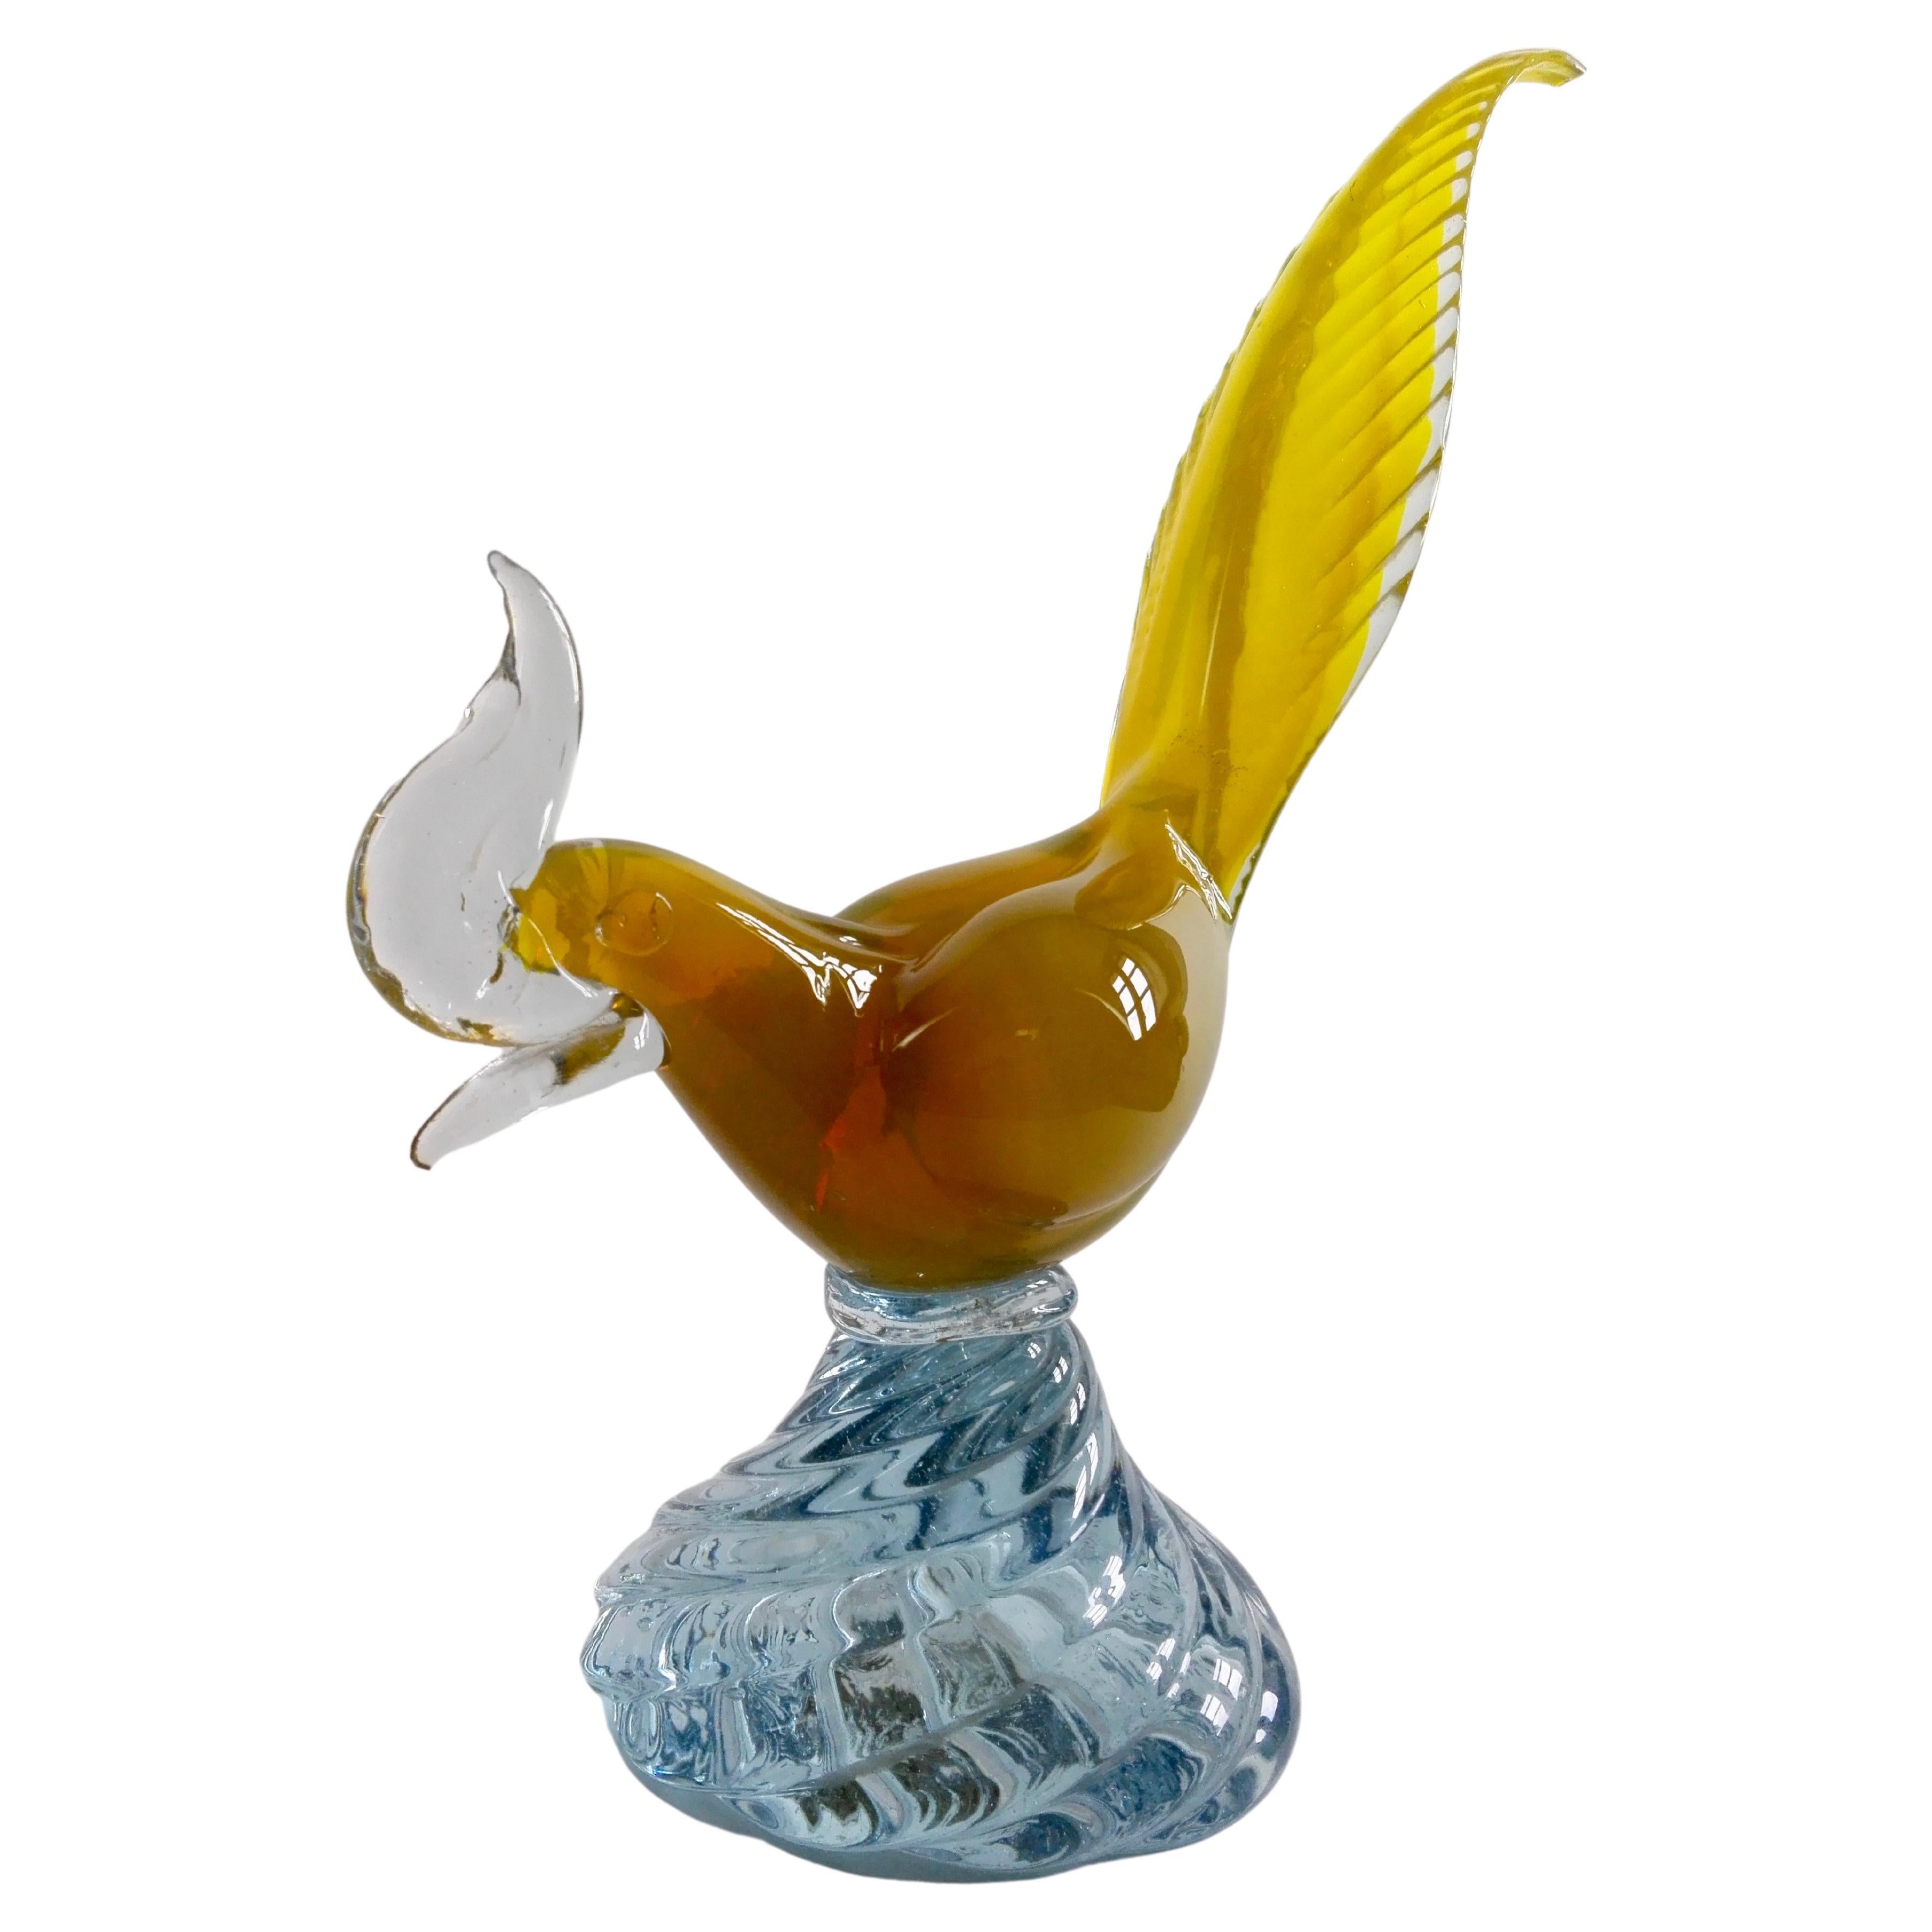 1950s Murano art glass hand-modelled Pheasant sculpture, pleasing in its choice of colours and attention to detail. Very beautiful spiral-shaped glass base.
Base glass diameter: 12 cm/ 4.72 in
Weight: 1.90 kg
During shipping, we carefully protect